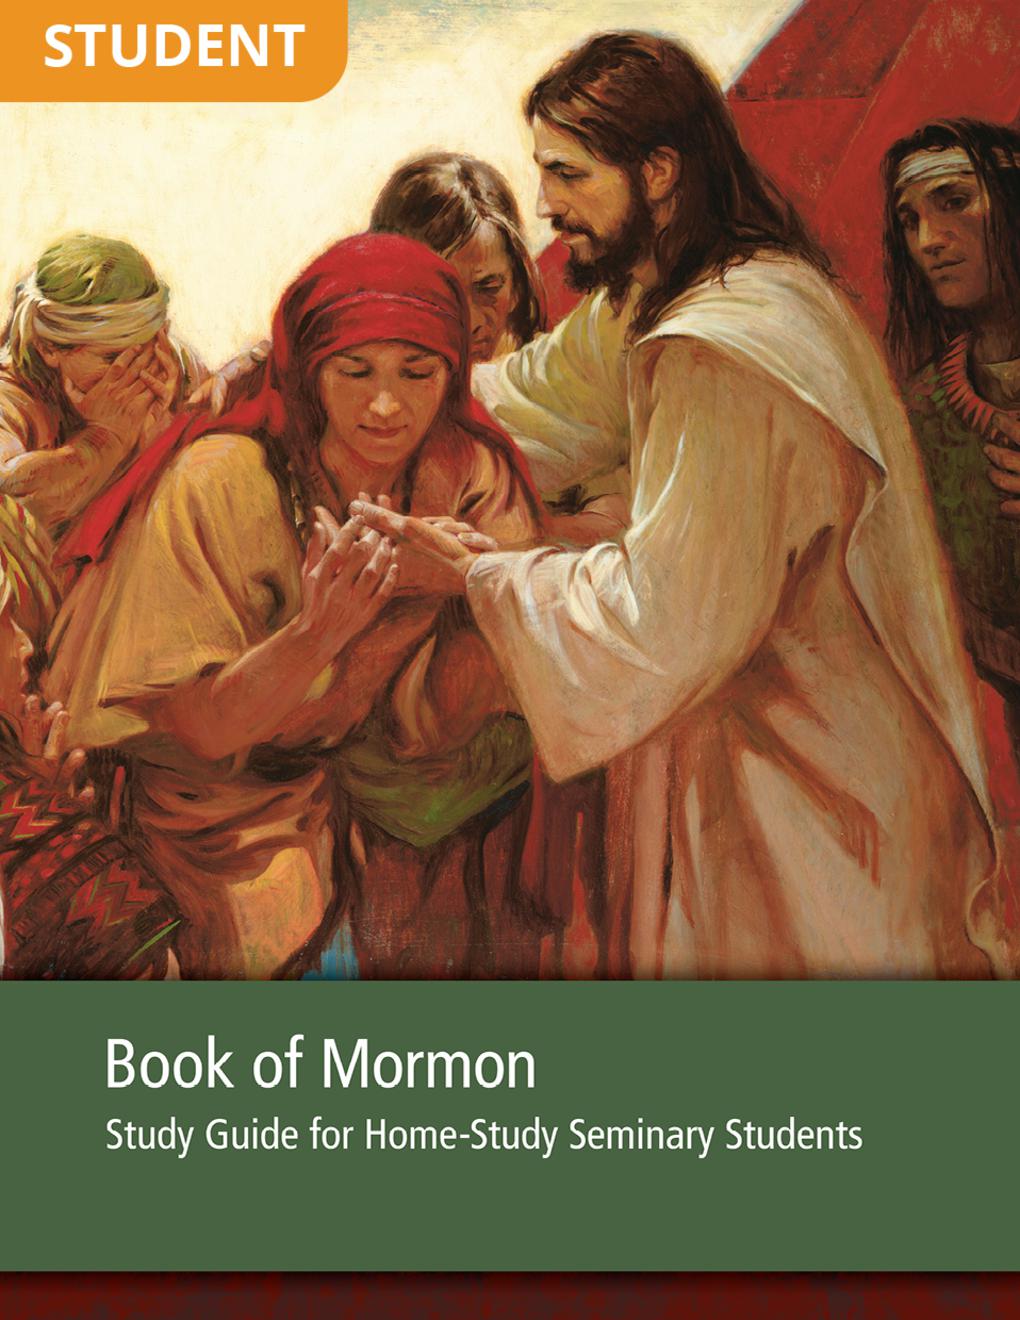 Book of Mormon Study Guide for Home-Study Seminary Students - 2013